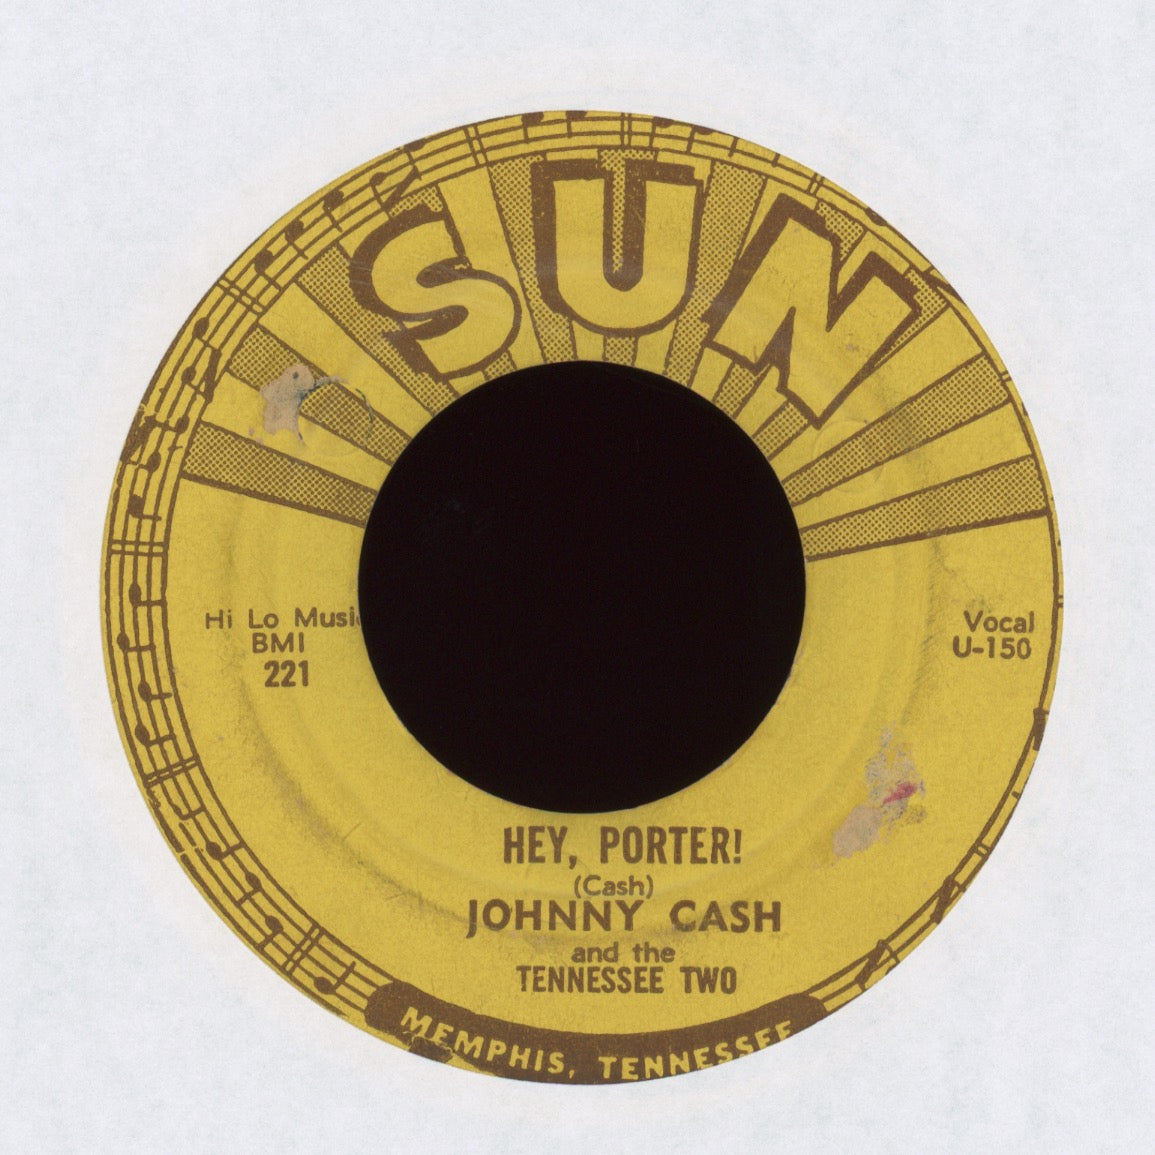 Johnny Cash & The Tennessee Two - Hey, Porter! on Sun